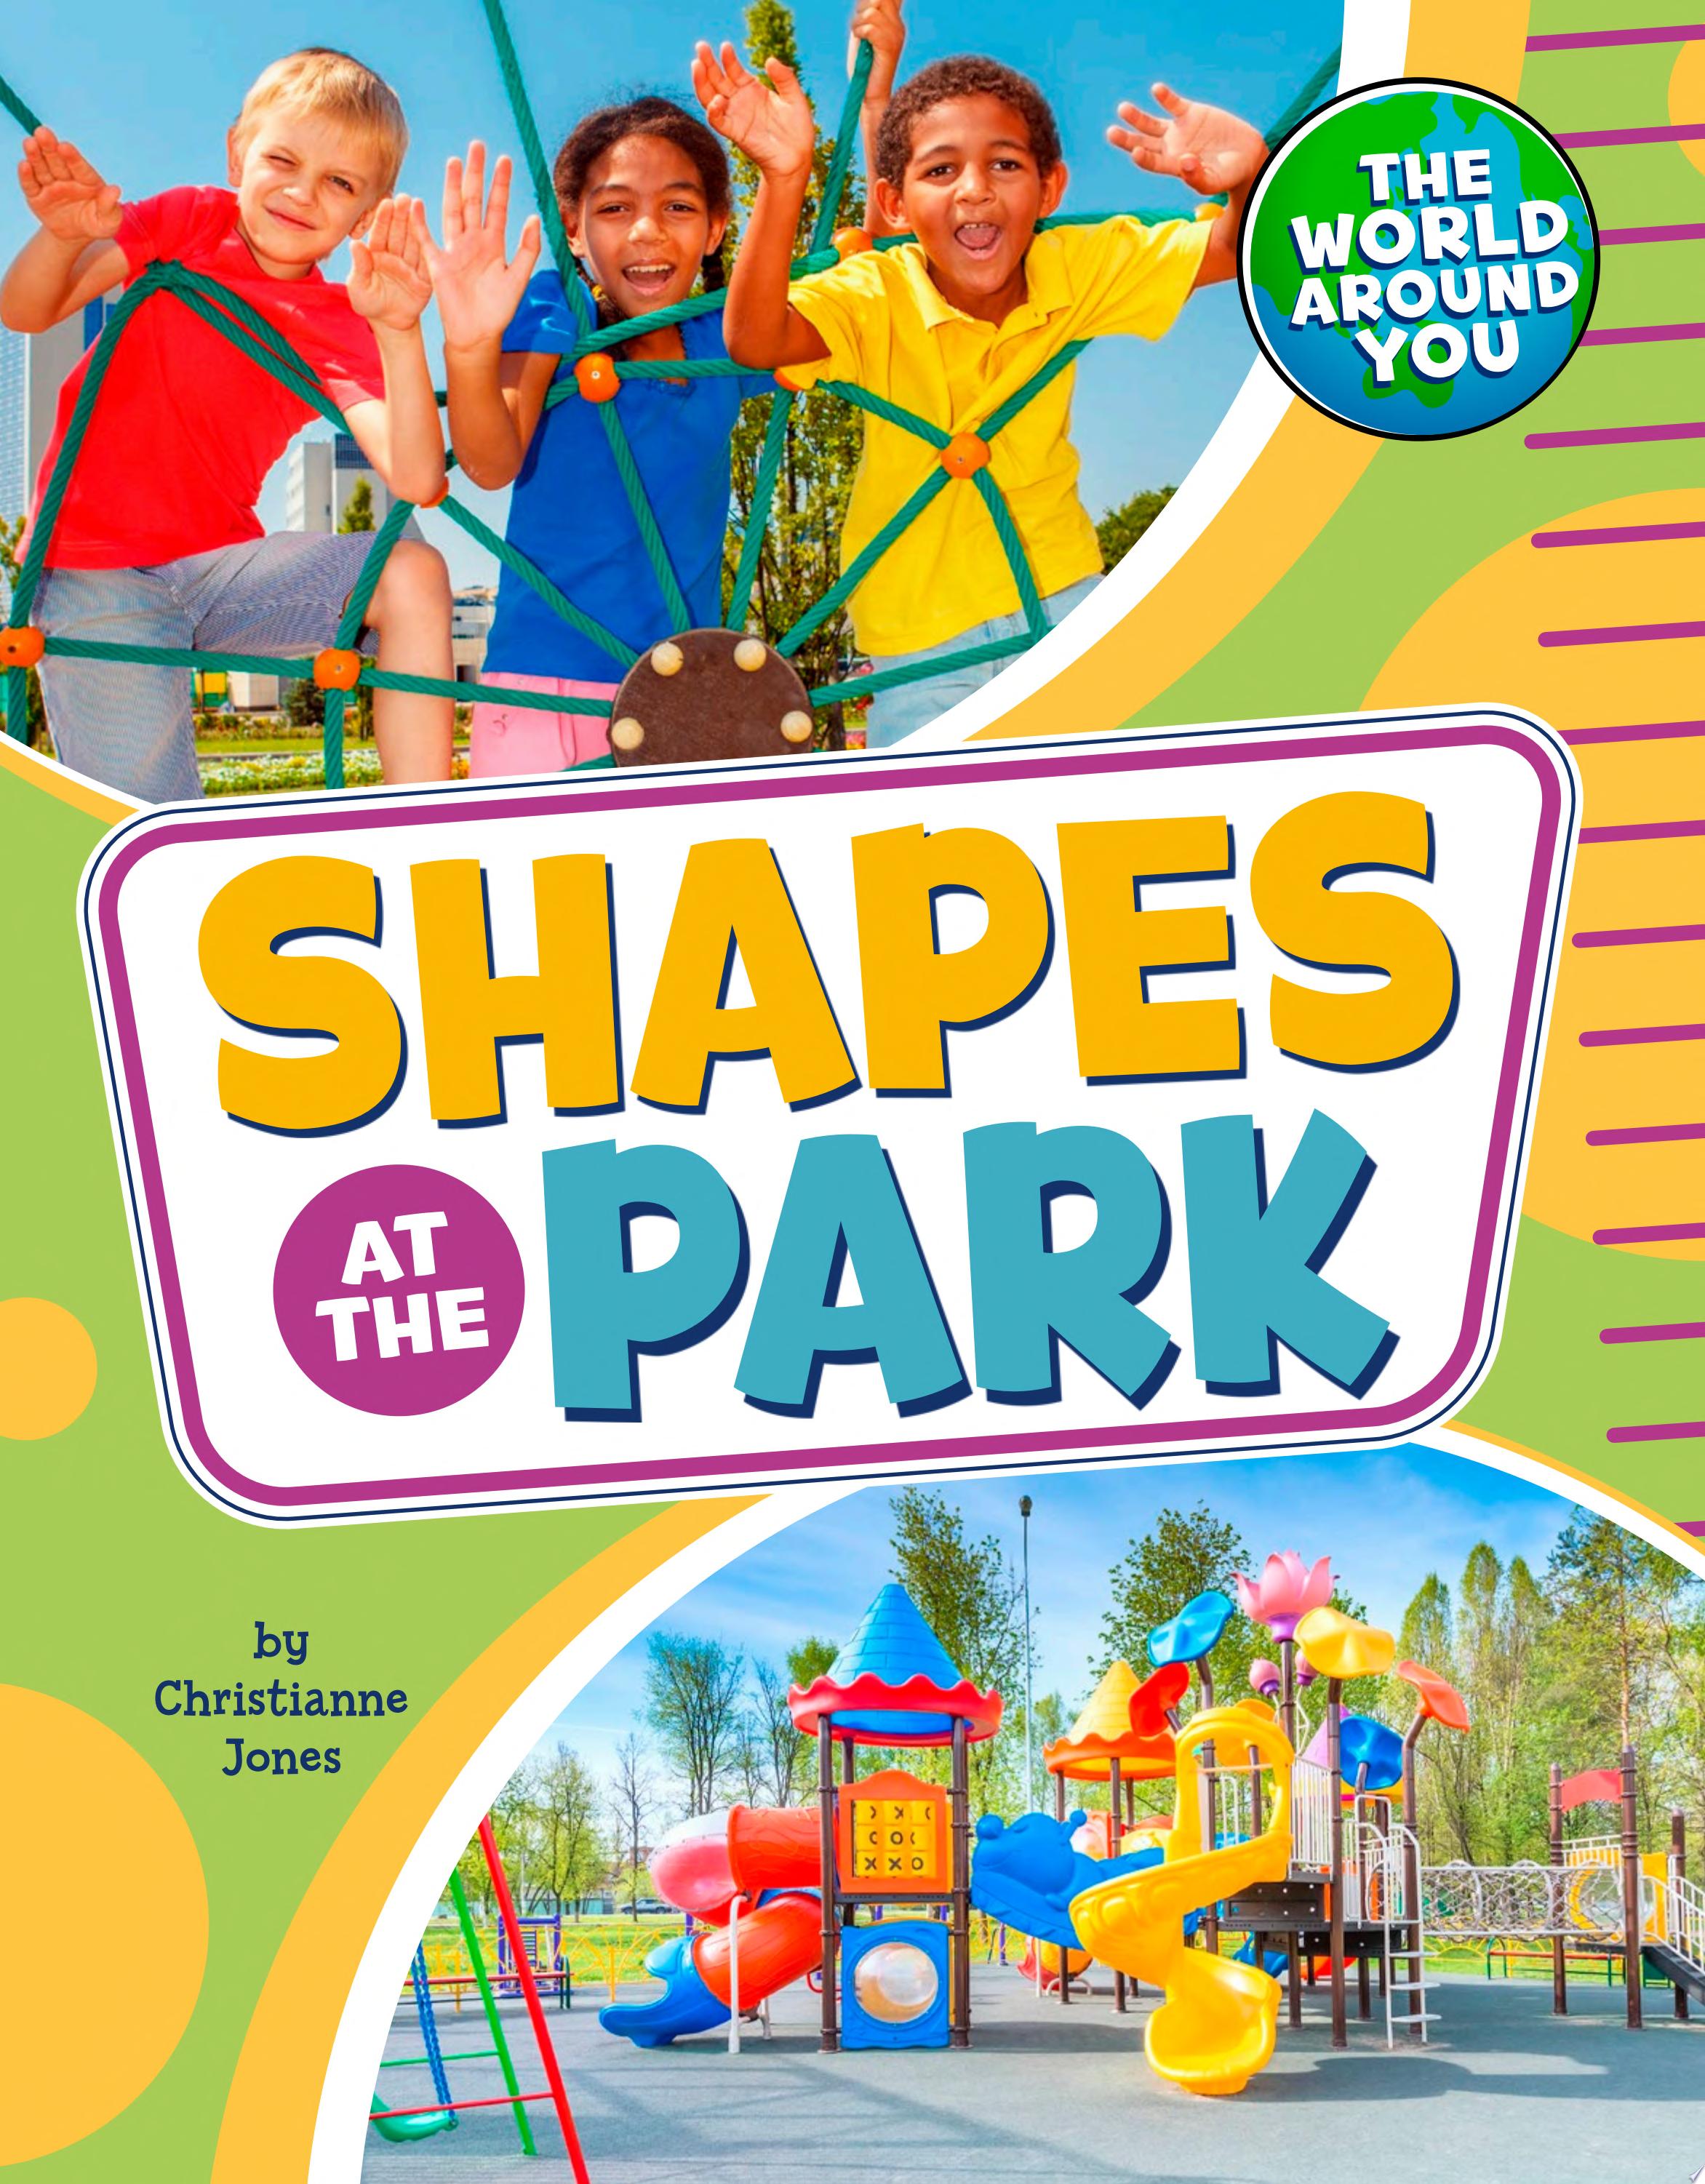 Image for "Shapes at the Park"